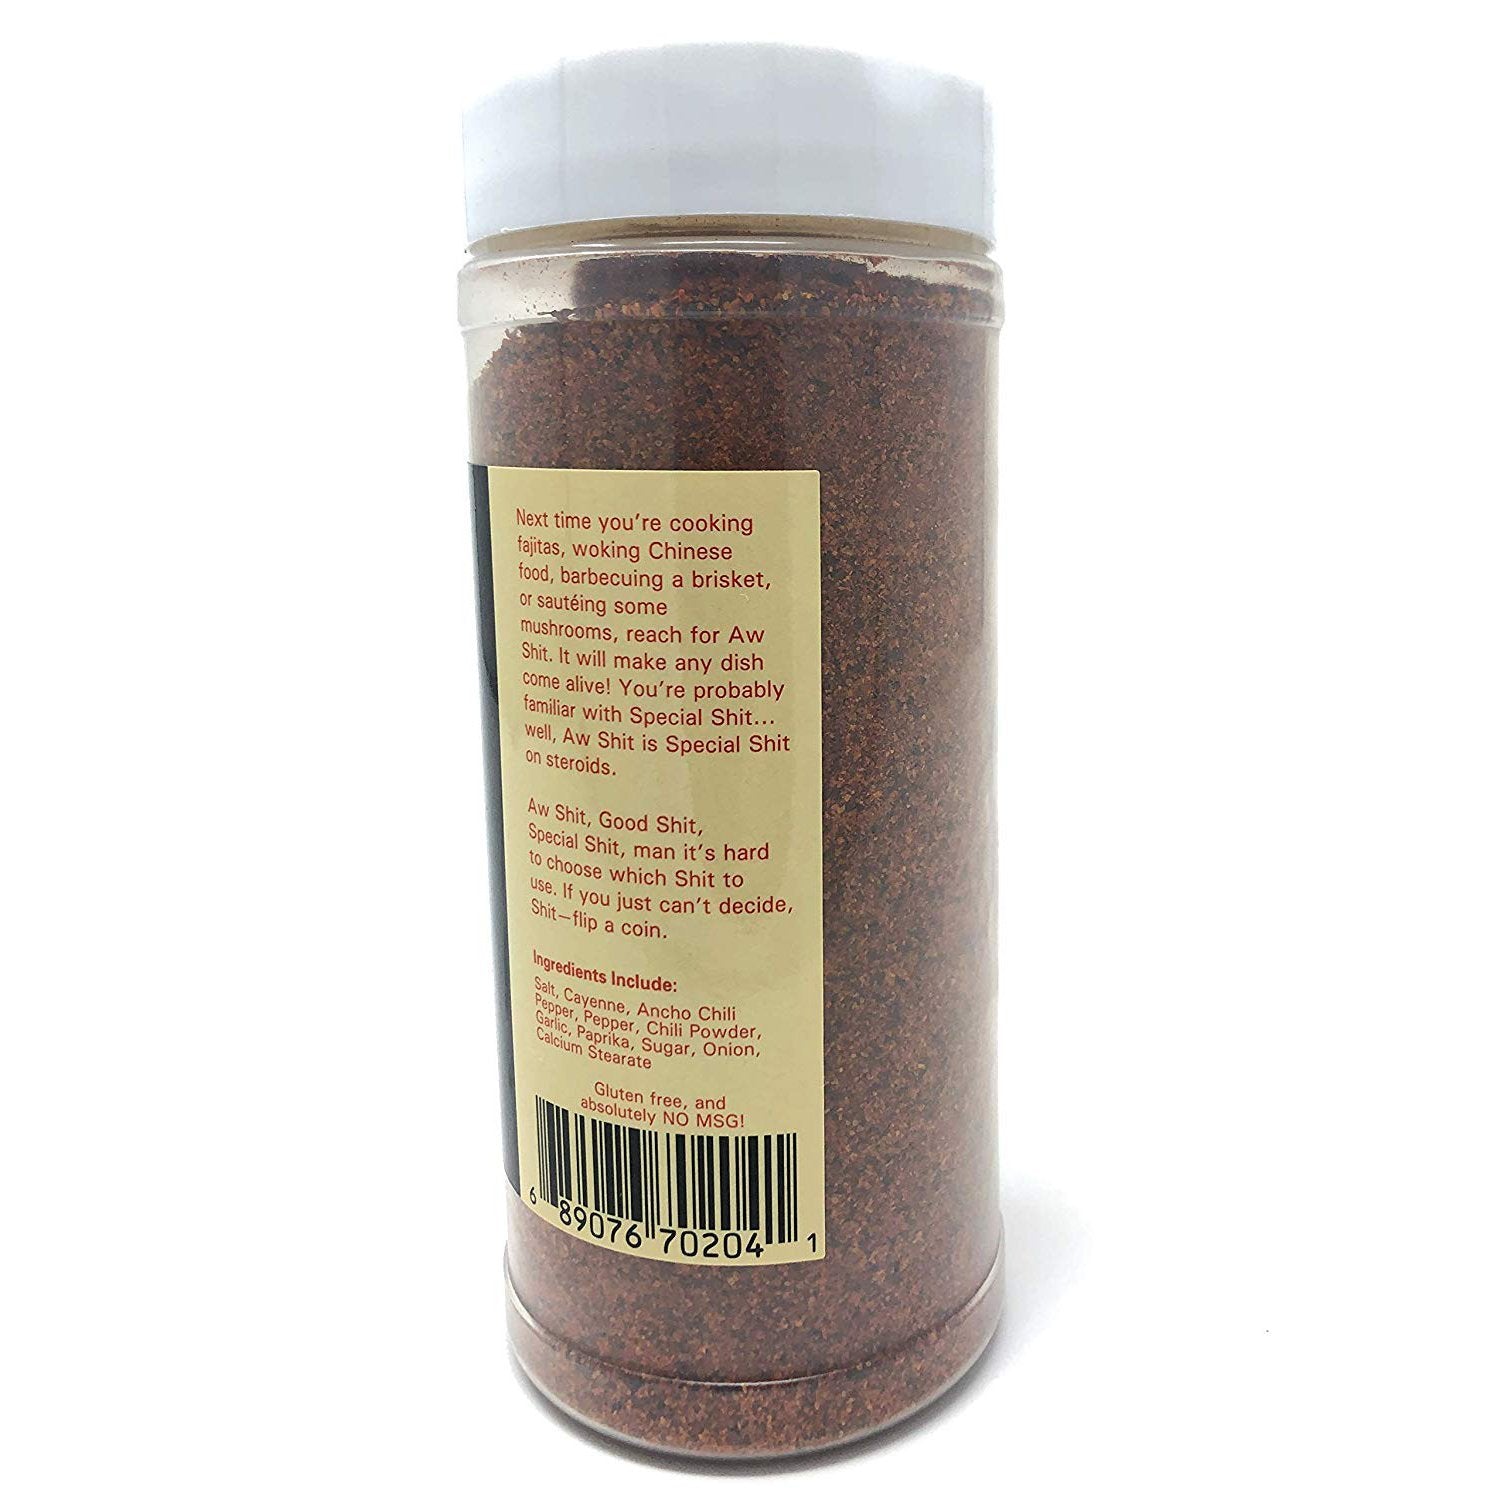 BCR Aw Shit Hot n' Spicy Seasoning - Pacific Flyway Supplies